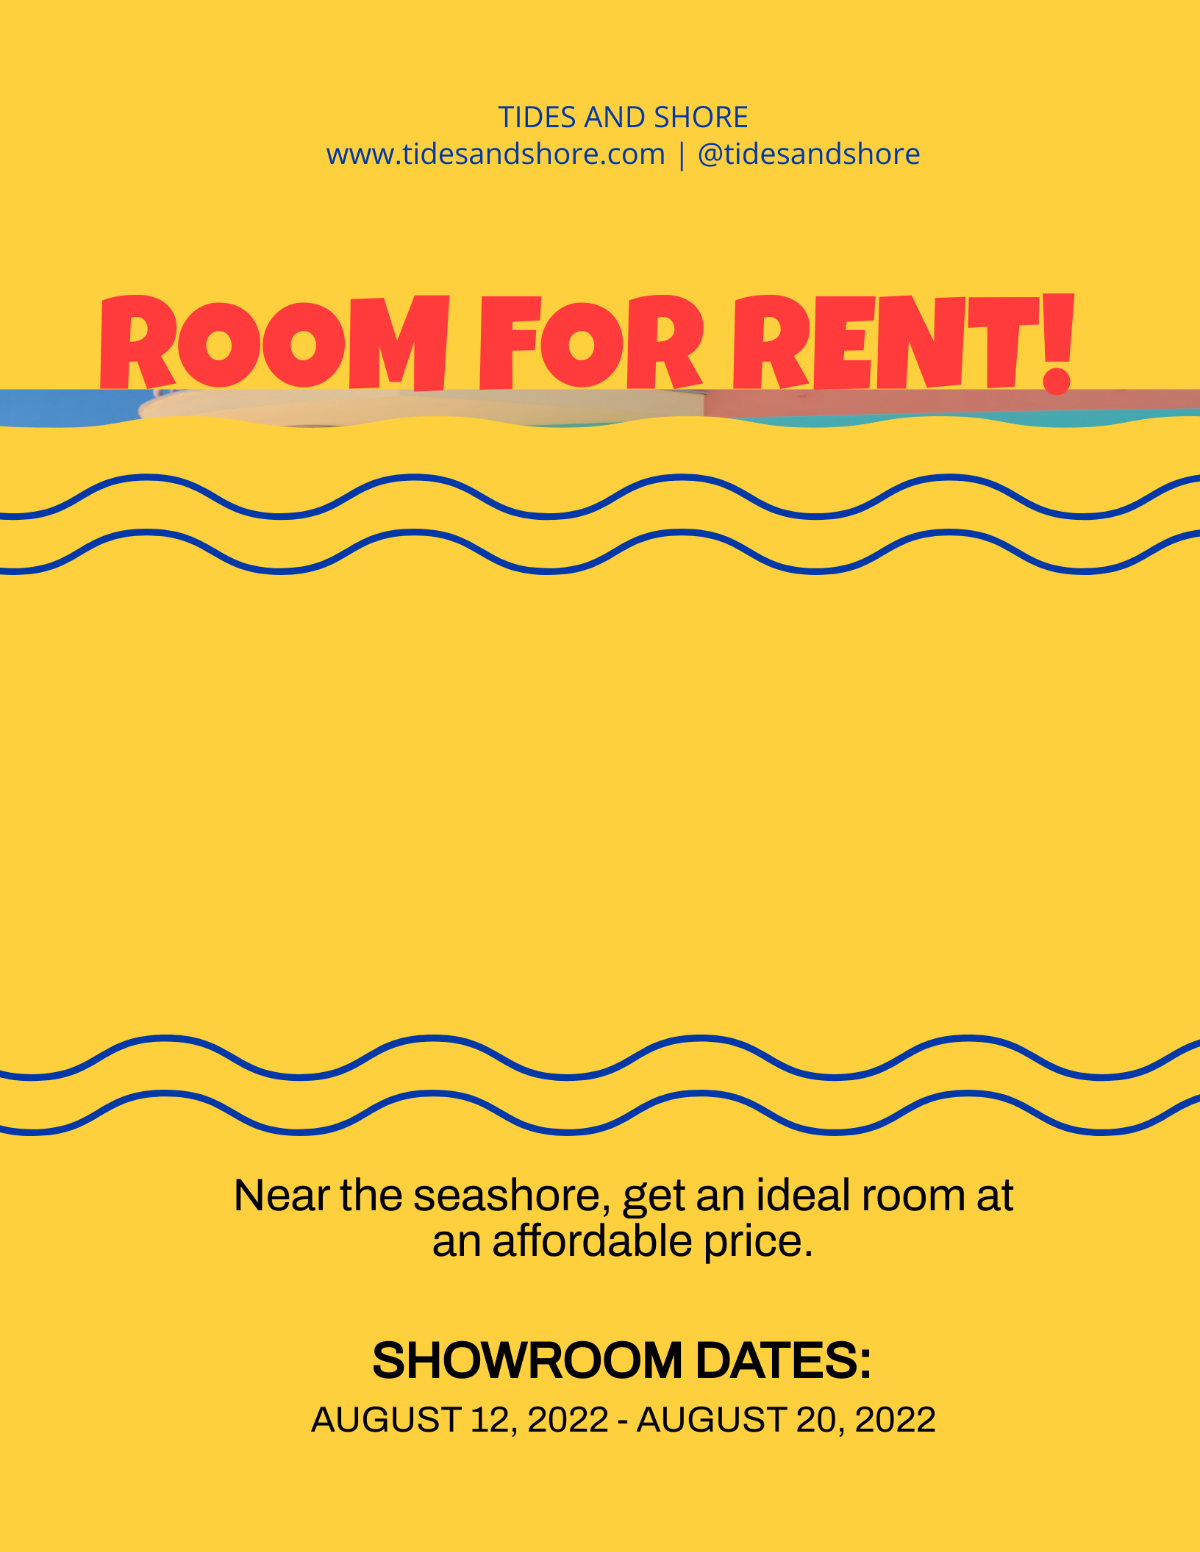 Free Room For Rent Flyer Template